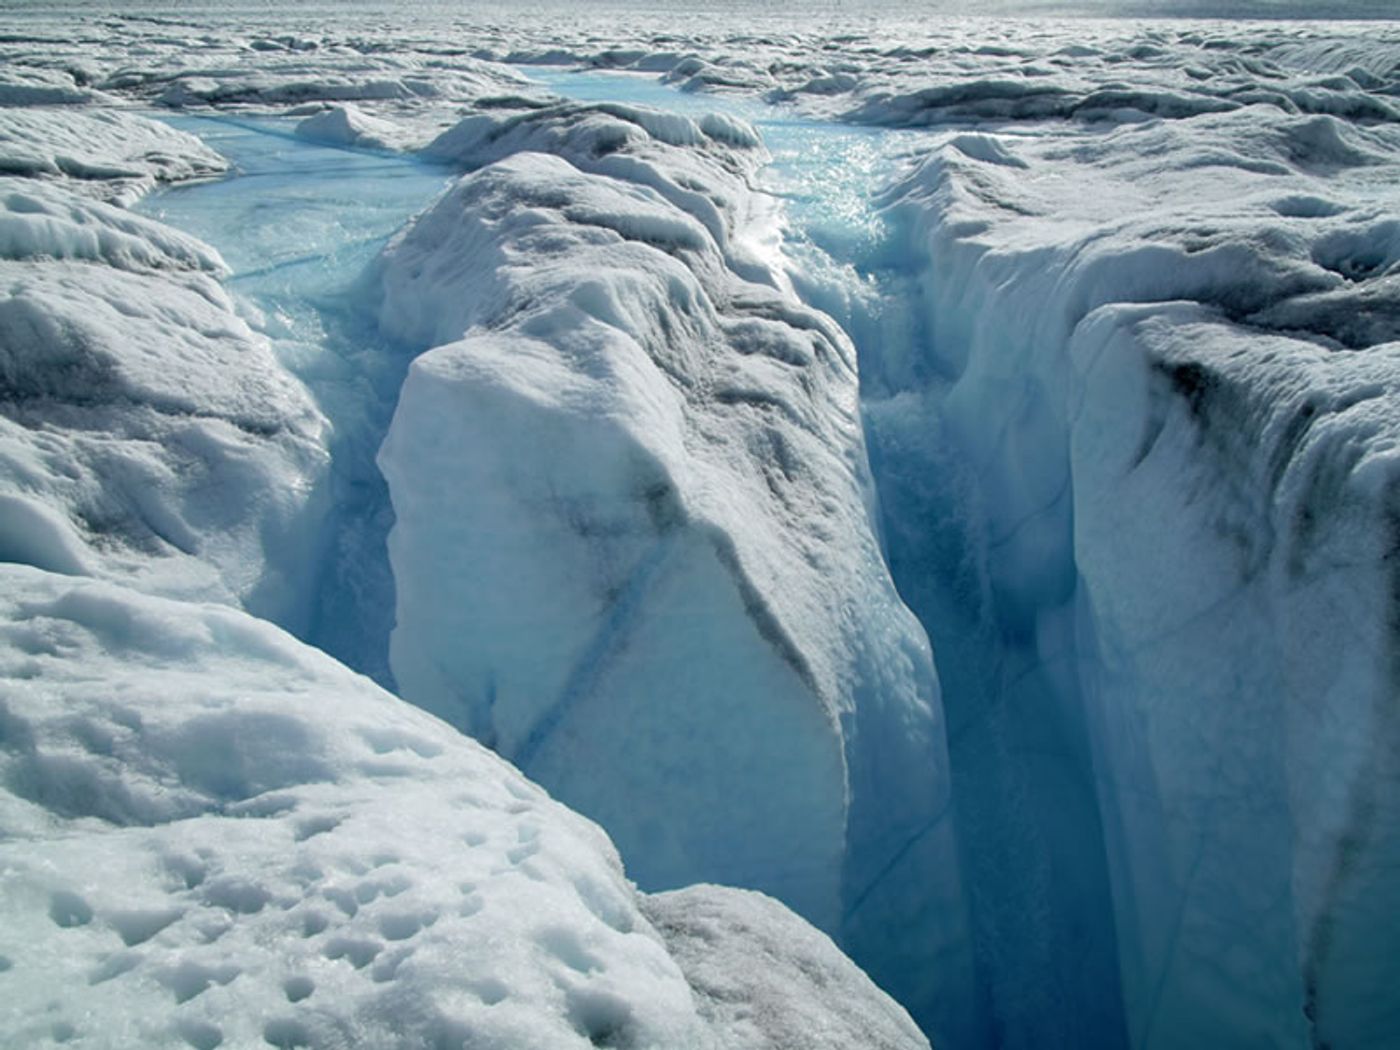 Meltwater rivers on top of Greenland's ice sheet. Source: dailysciencejournal.com